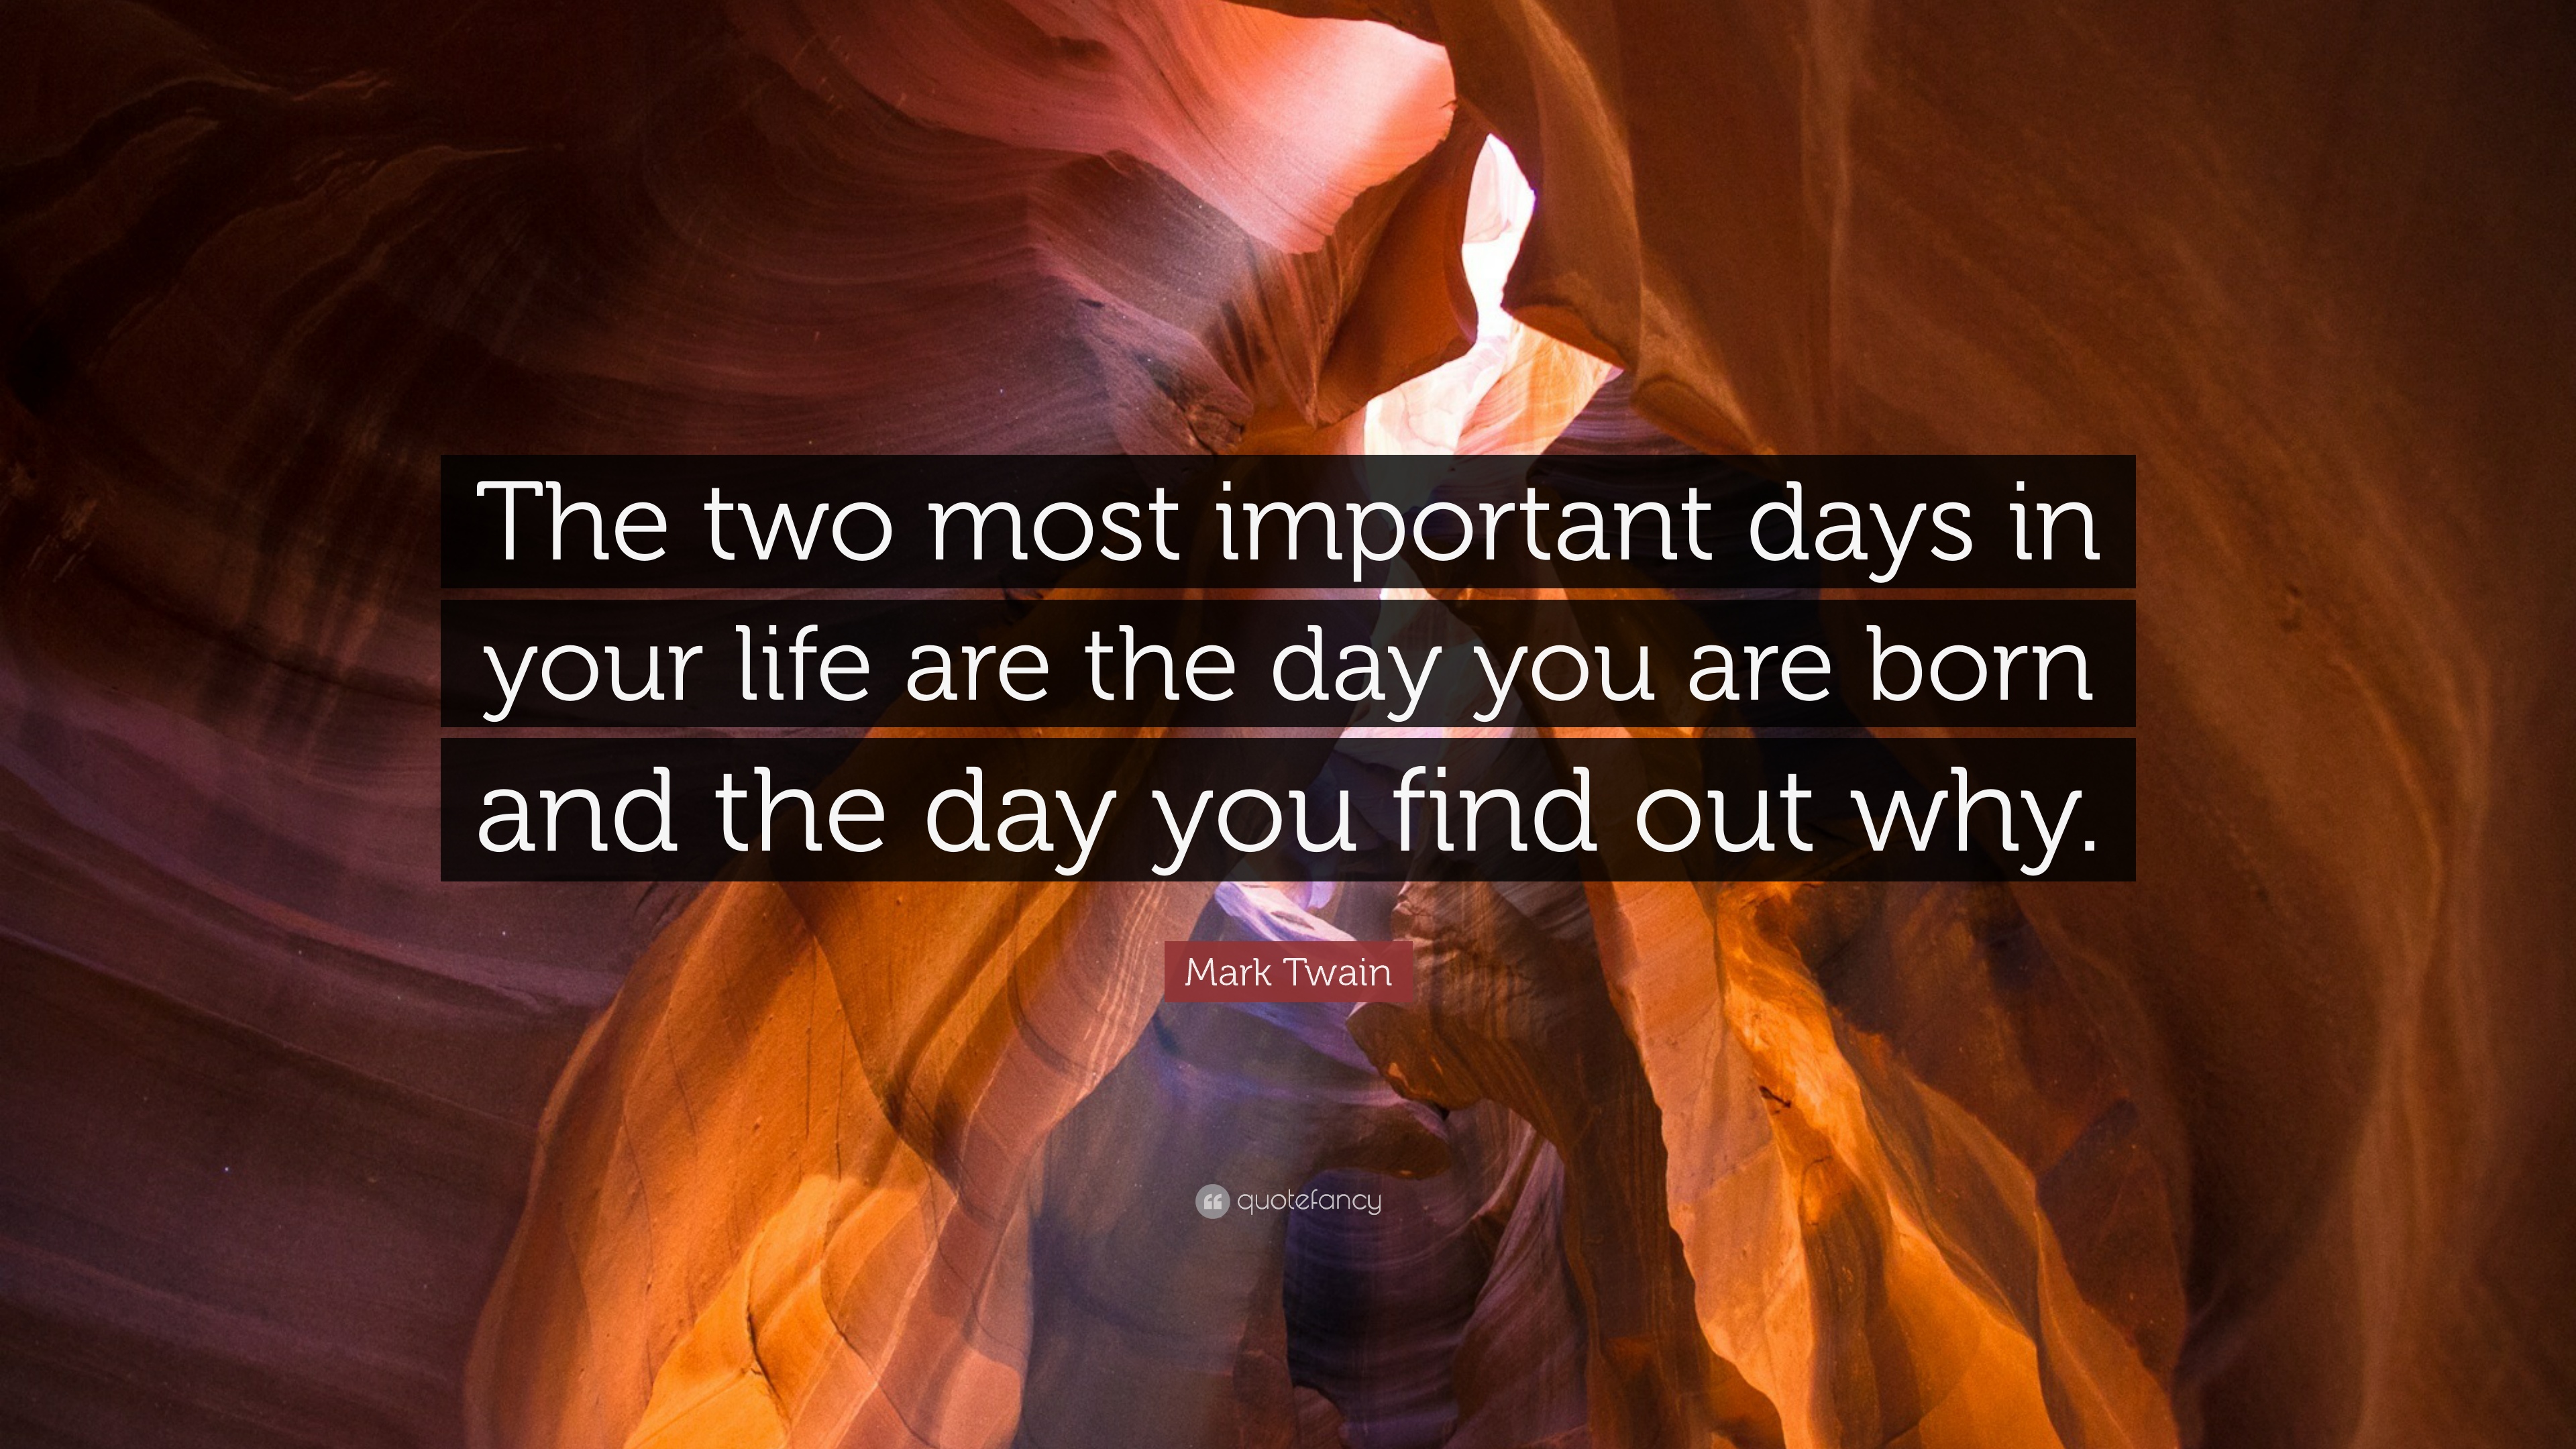 Mark Twain Two Most Important Days in Your Life